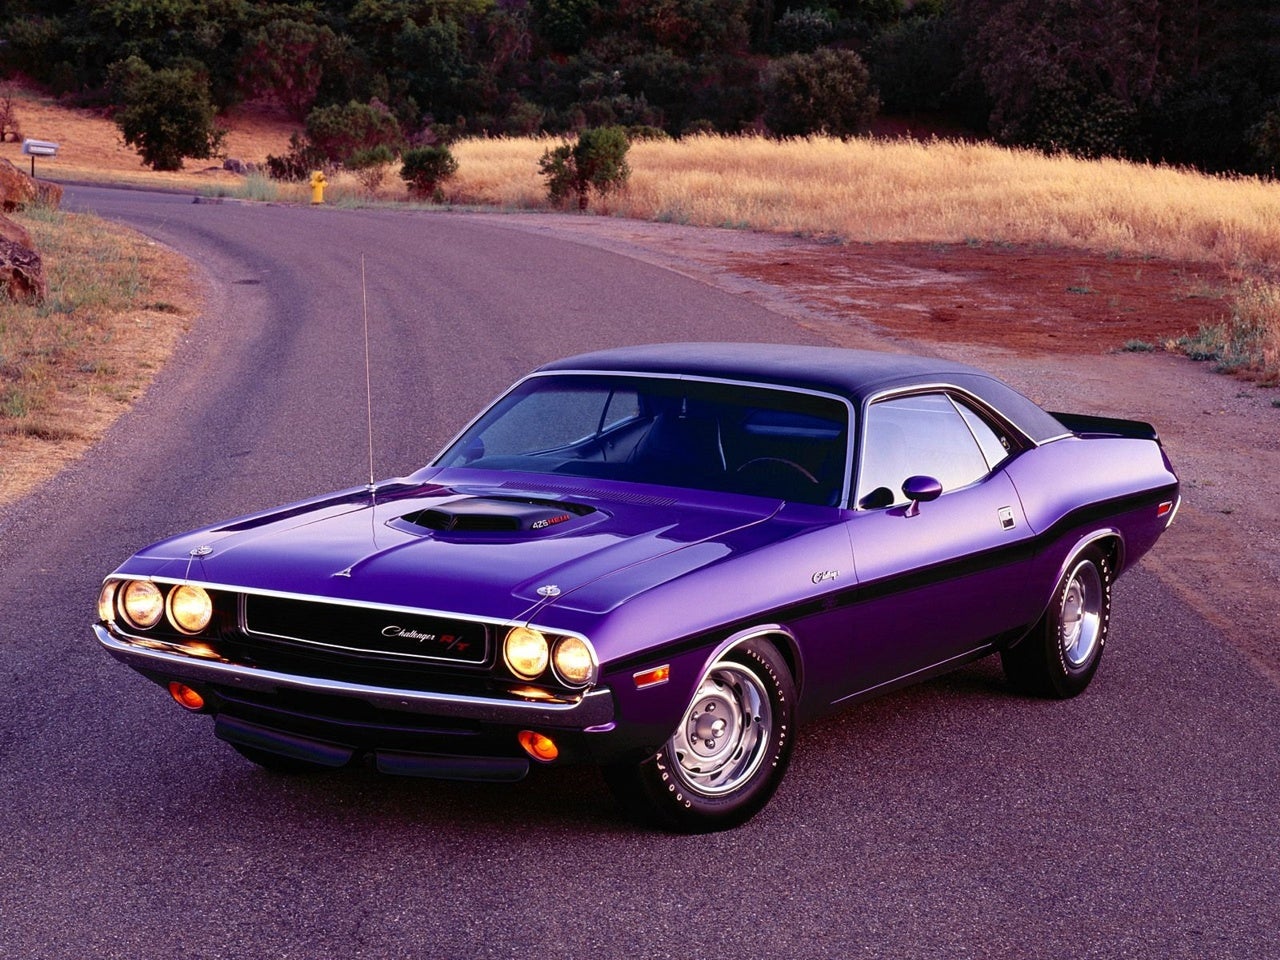 http://static.cargurus.com/images/site/2011/08/18/05/09/1970_dodge_challenger-pic-3716980670565766327.jpeg